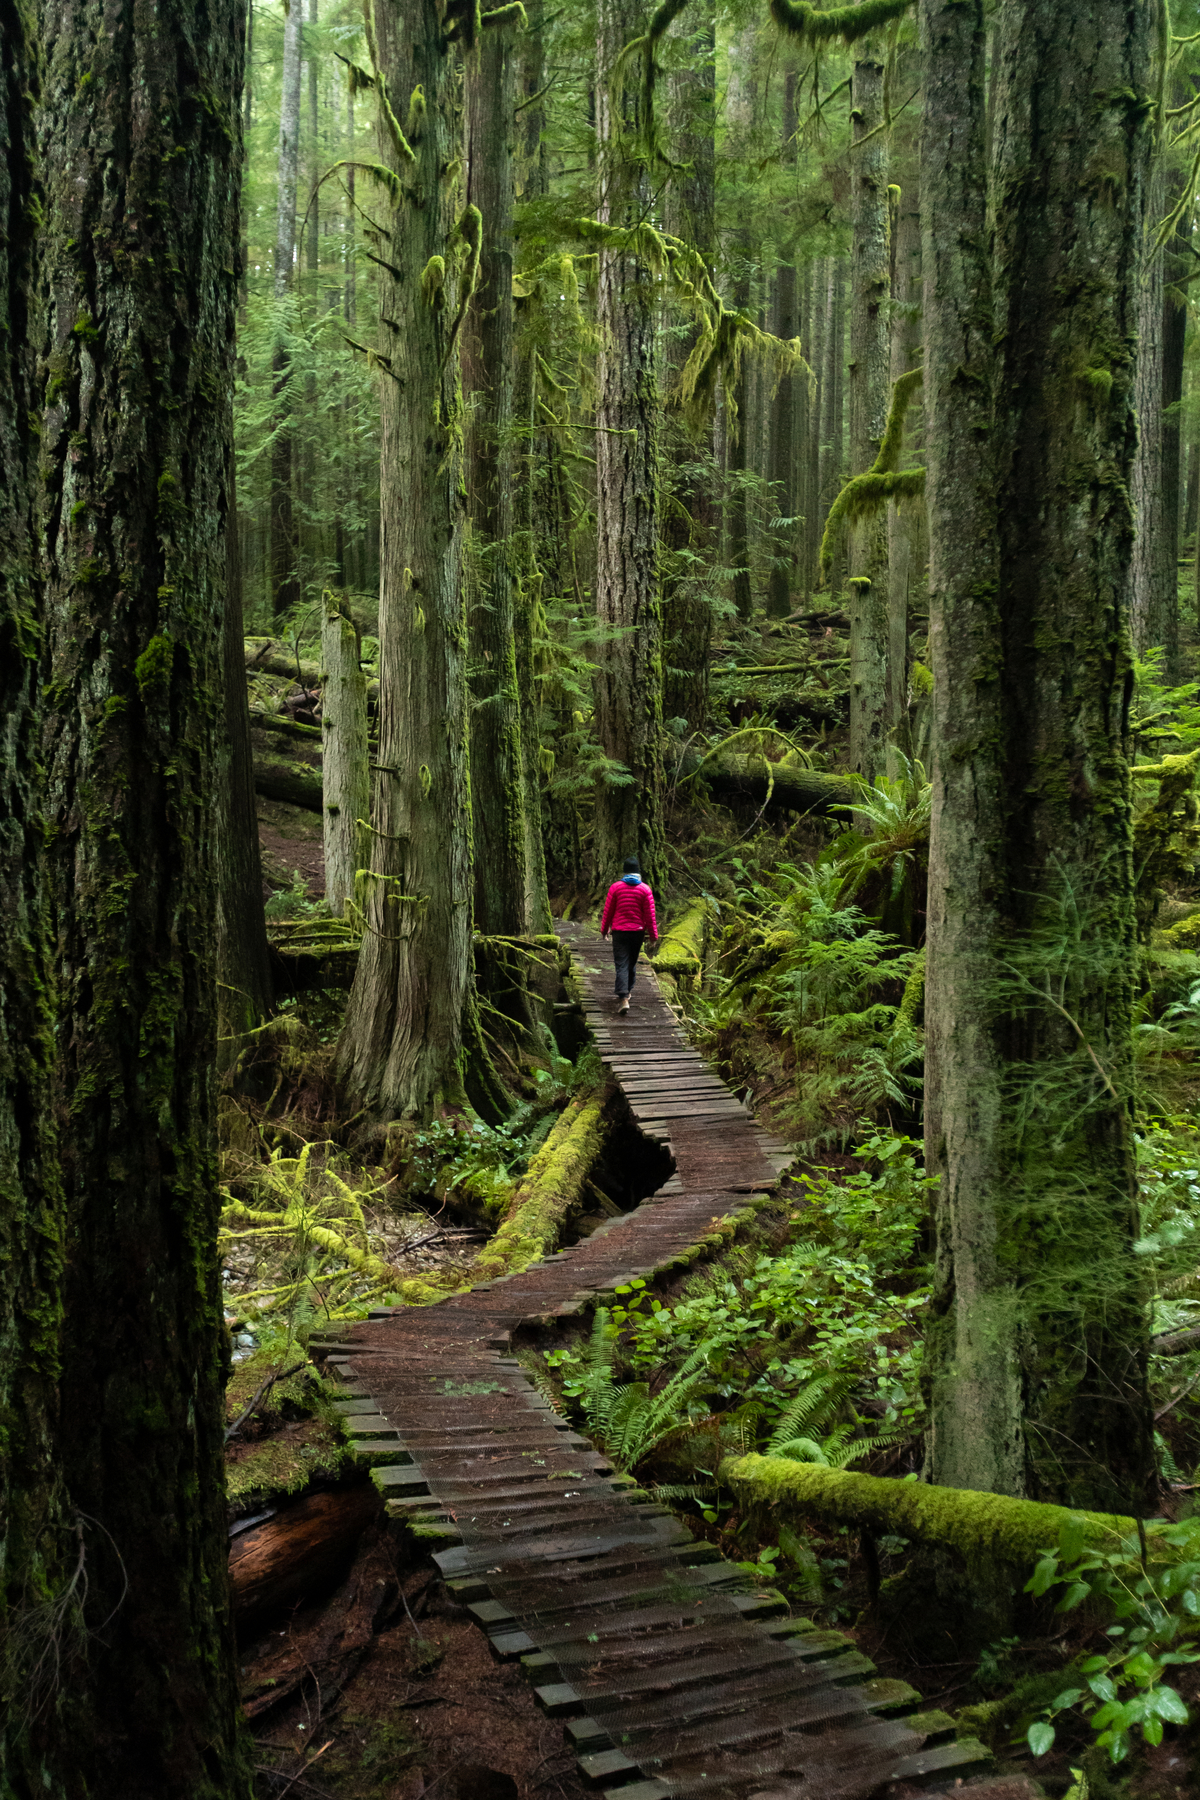 A person in a red puffy jacket walks along a wooden boardwalk through the forest